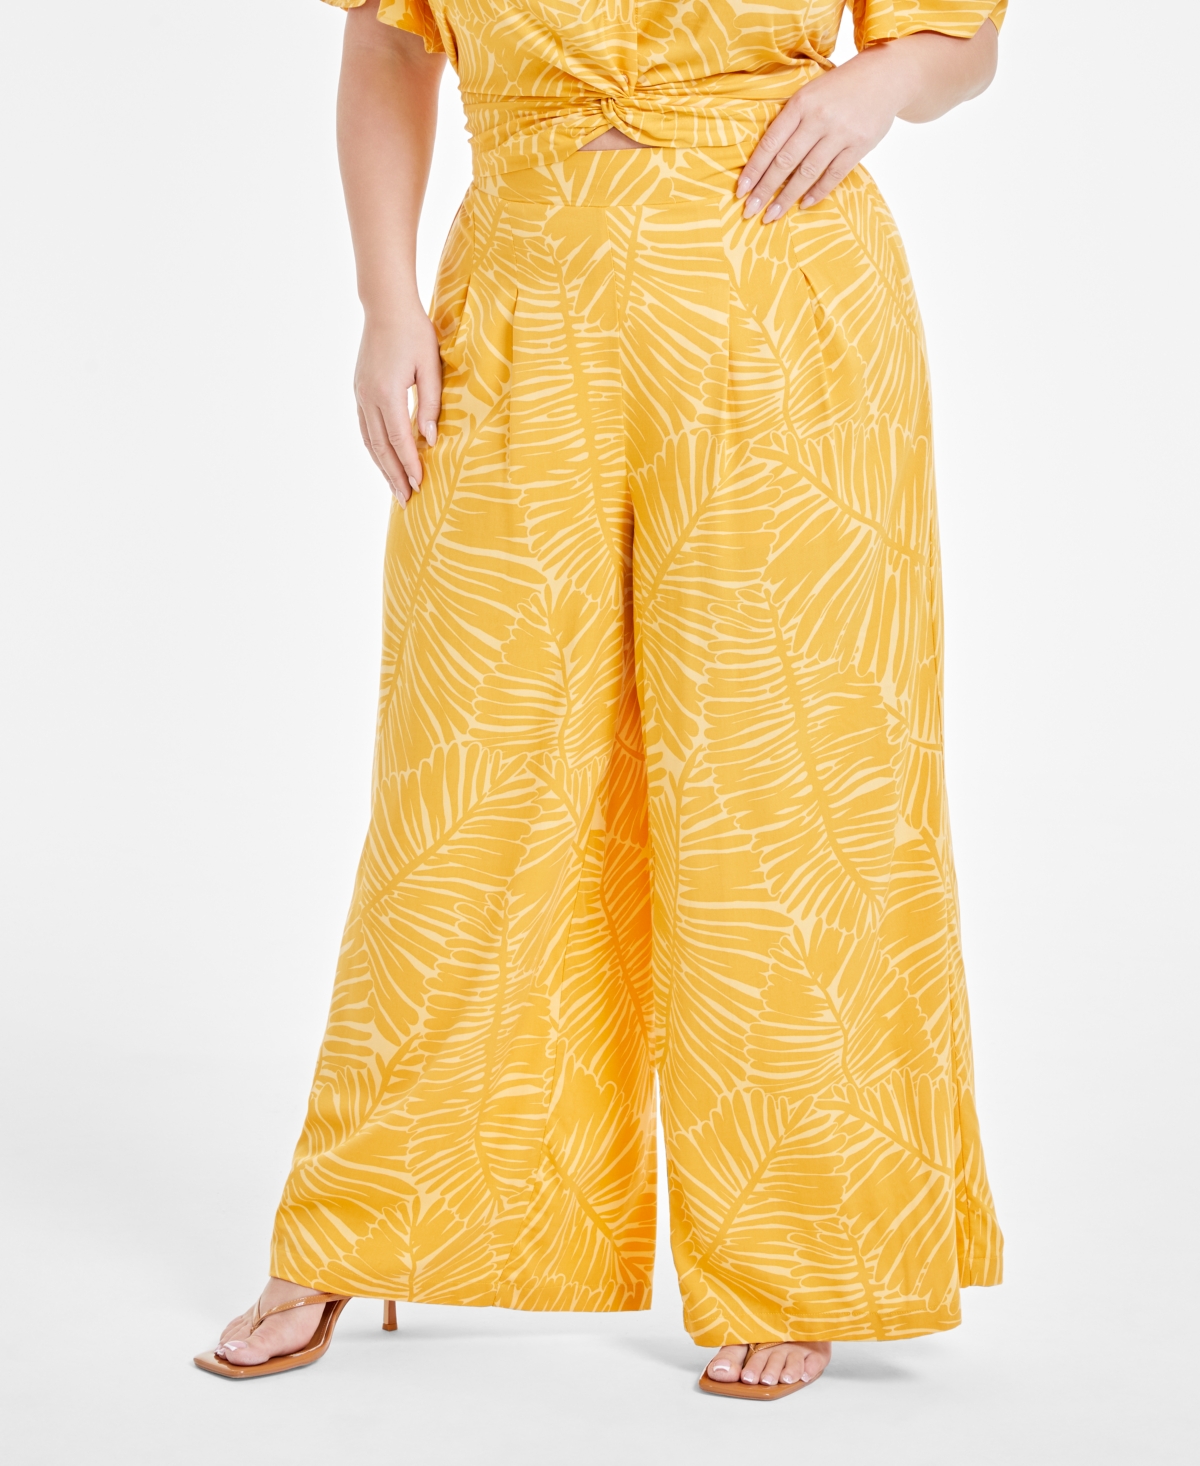 Trendy Plus Size Wide-Leg Pants, Created for Macy's - Golden Pal